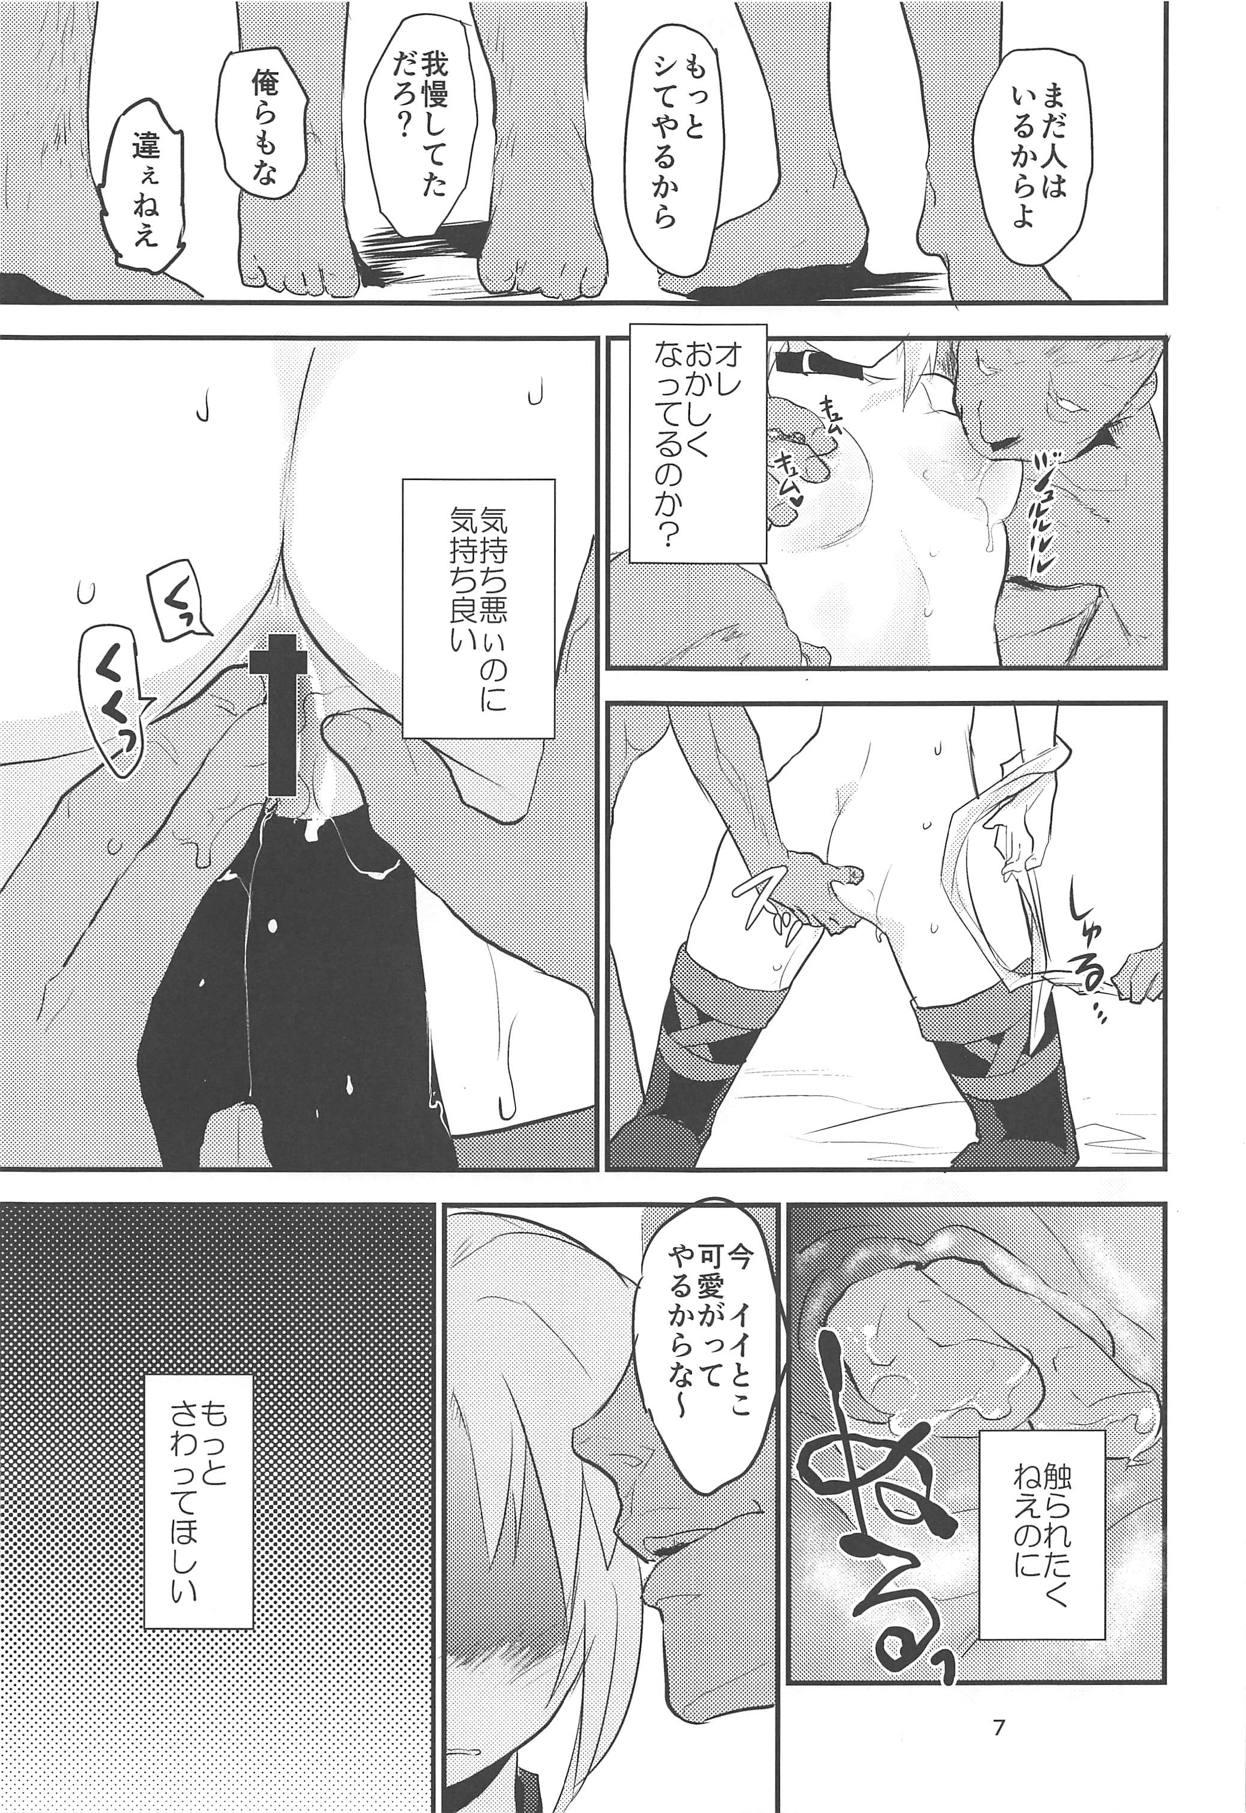 Korea Erotic to Knight - Fate grand order Deep - Page 6